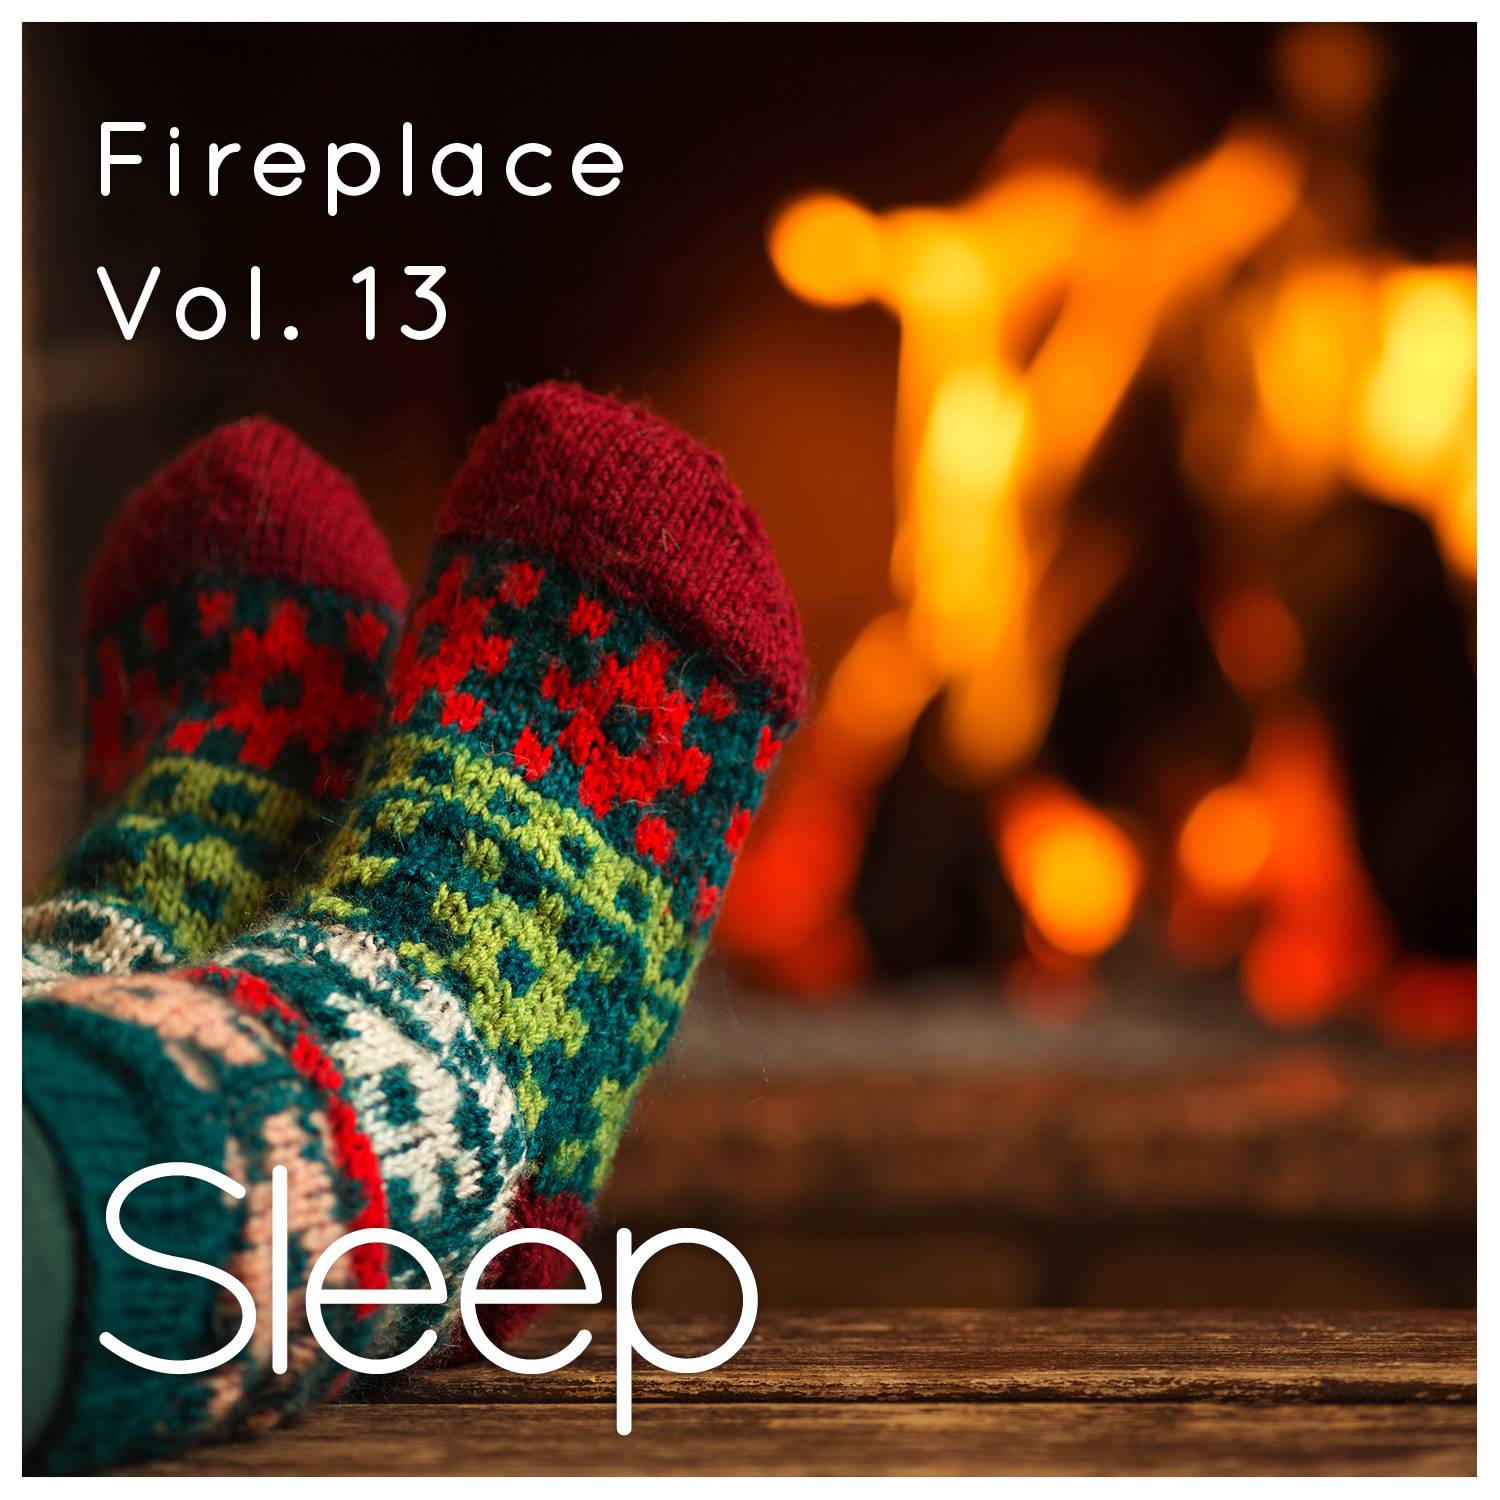 Burning Fireplace with Crackling Fire Sounds, Pt. 62